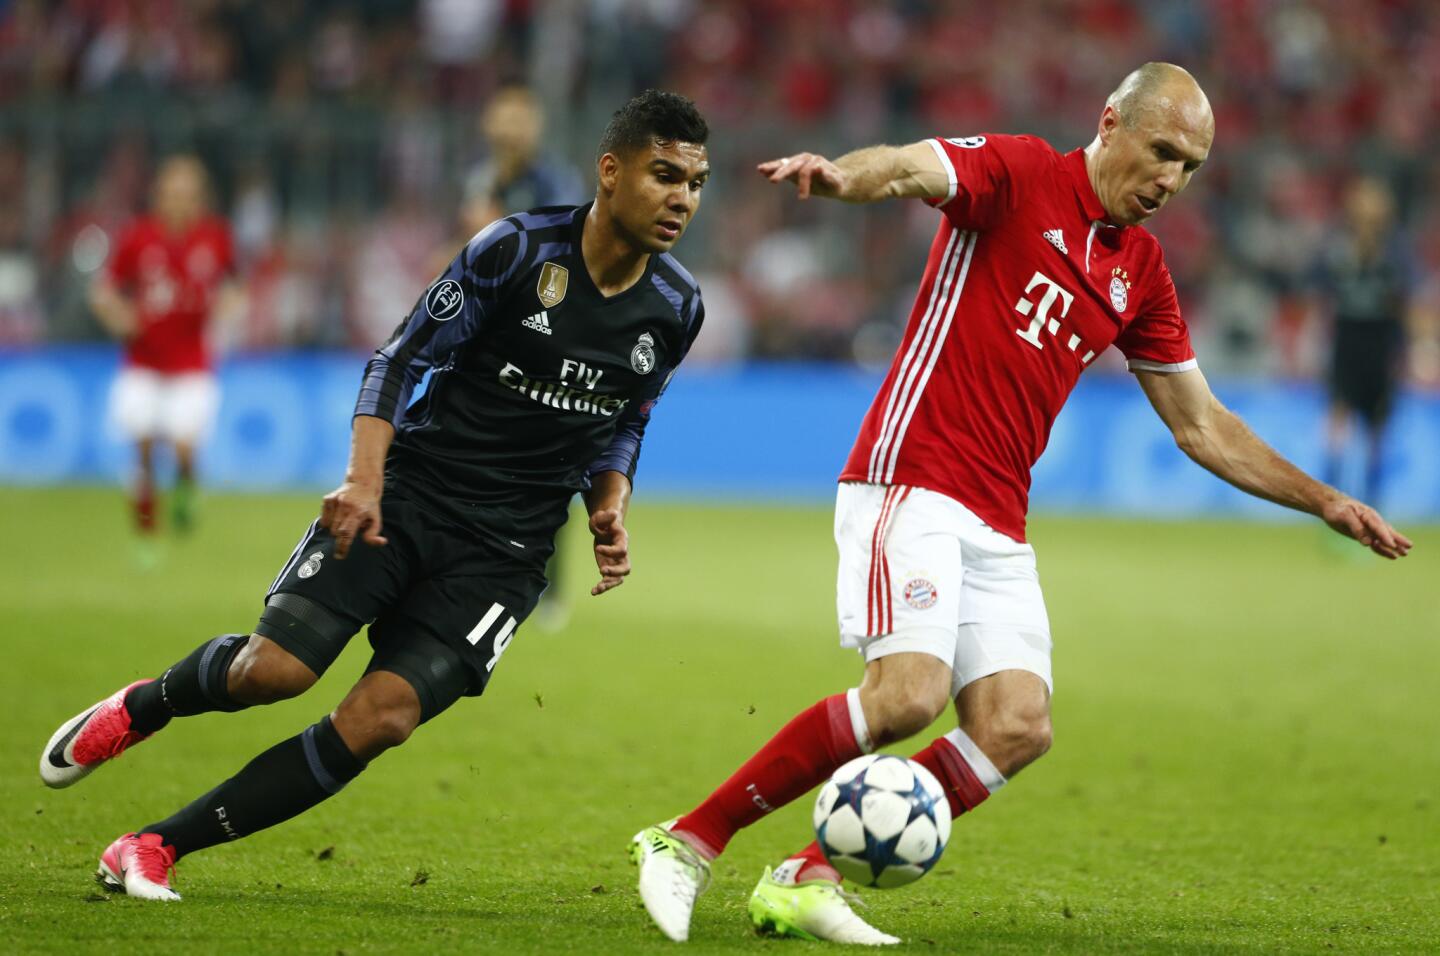 Bayern Munich's Arjen Robben in action with Real Madrid's Casemiro